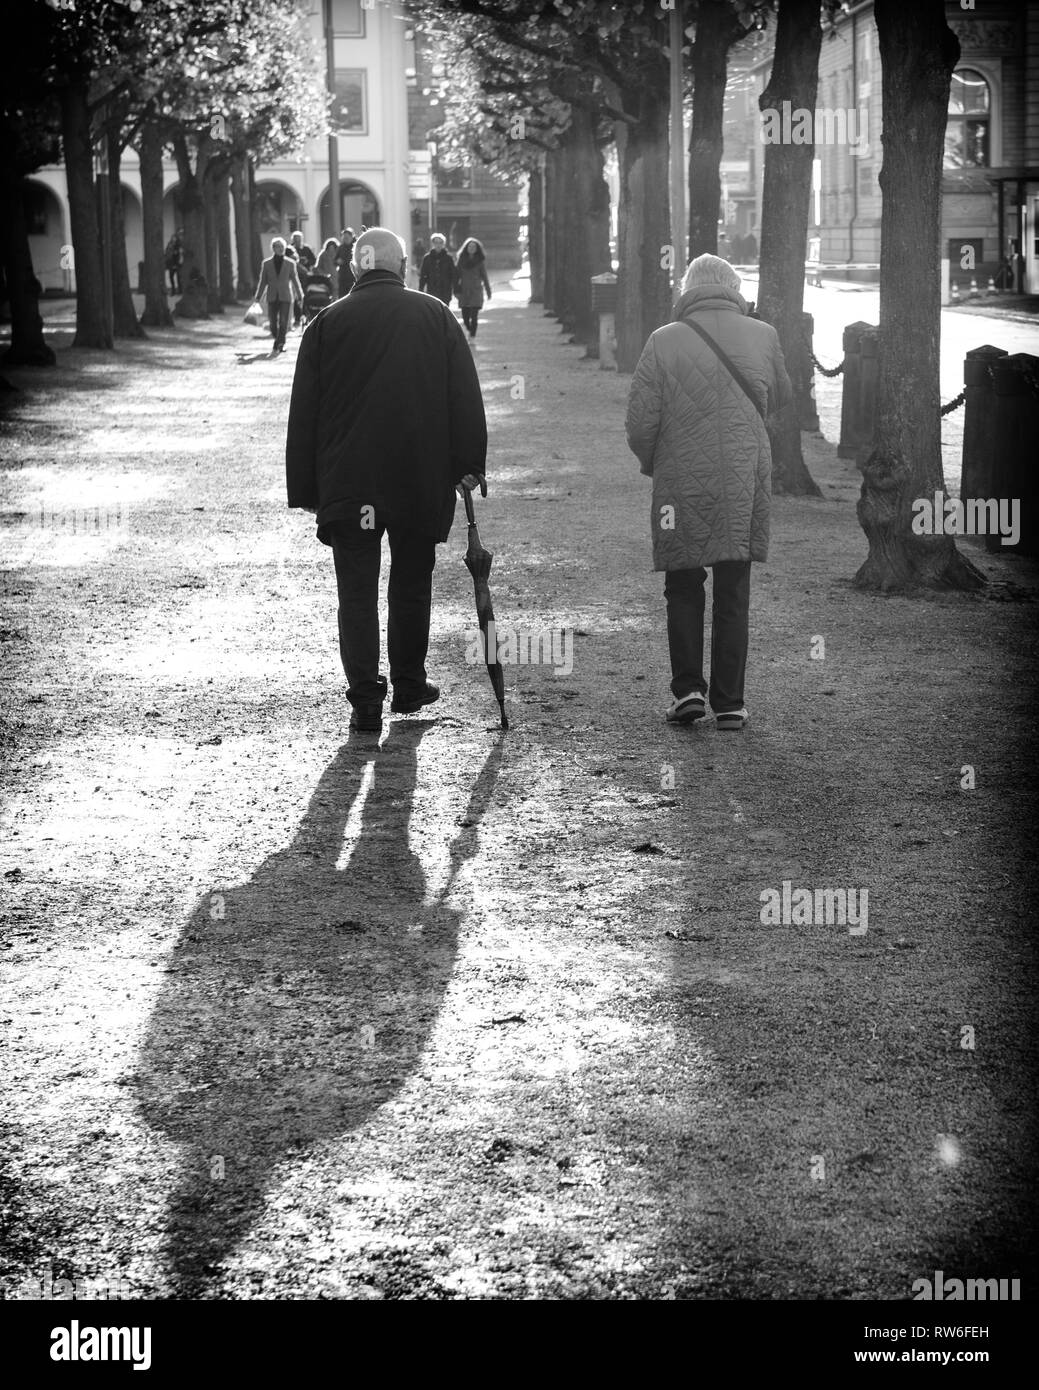 Karlsruhe, Germany - Oct 29 2017: Adults and seniors walking on alley Schloss Bezirk near Federal Constitutional Court building Bundesverfassungsgericht - black and white Stock Photo